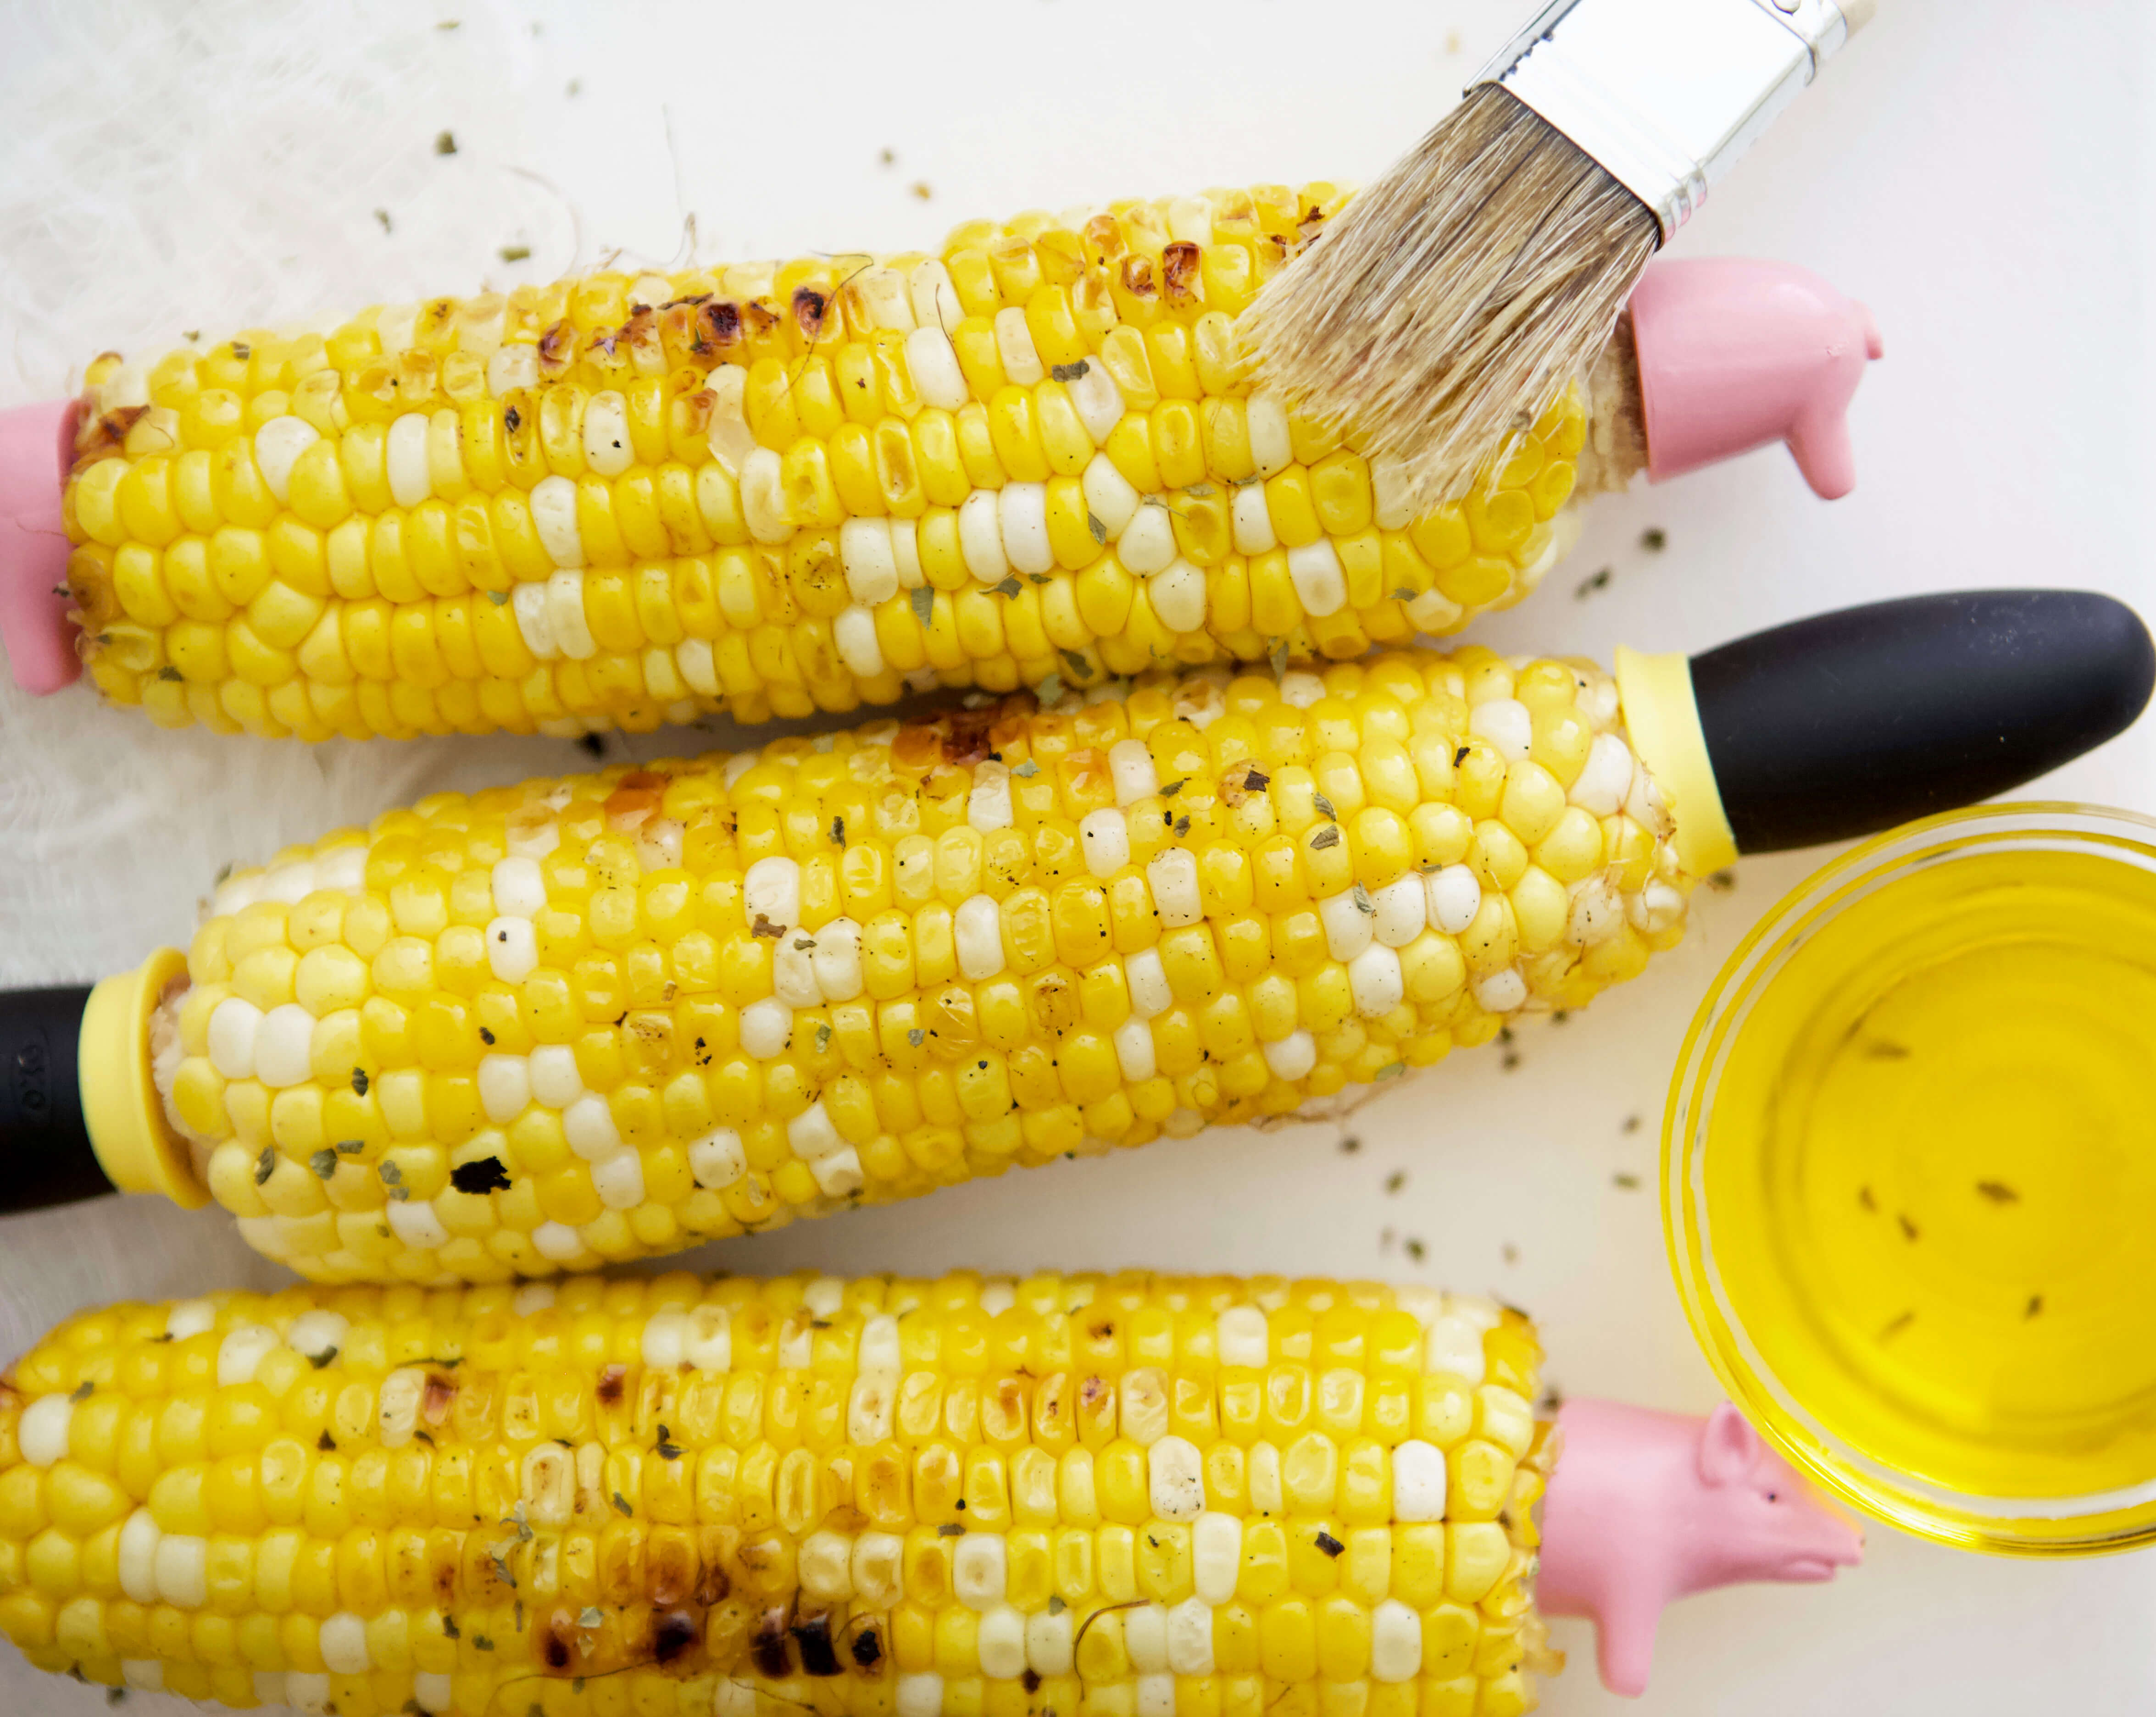 14 Food Photography Lessons Learned www.sarahkayhoffman.com #foodphotography #lifestyleblogger #contentmarketing #photography Corn on the cob with Nutiva Buttery Coconut Oil